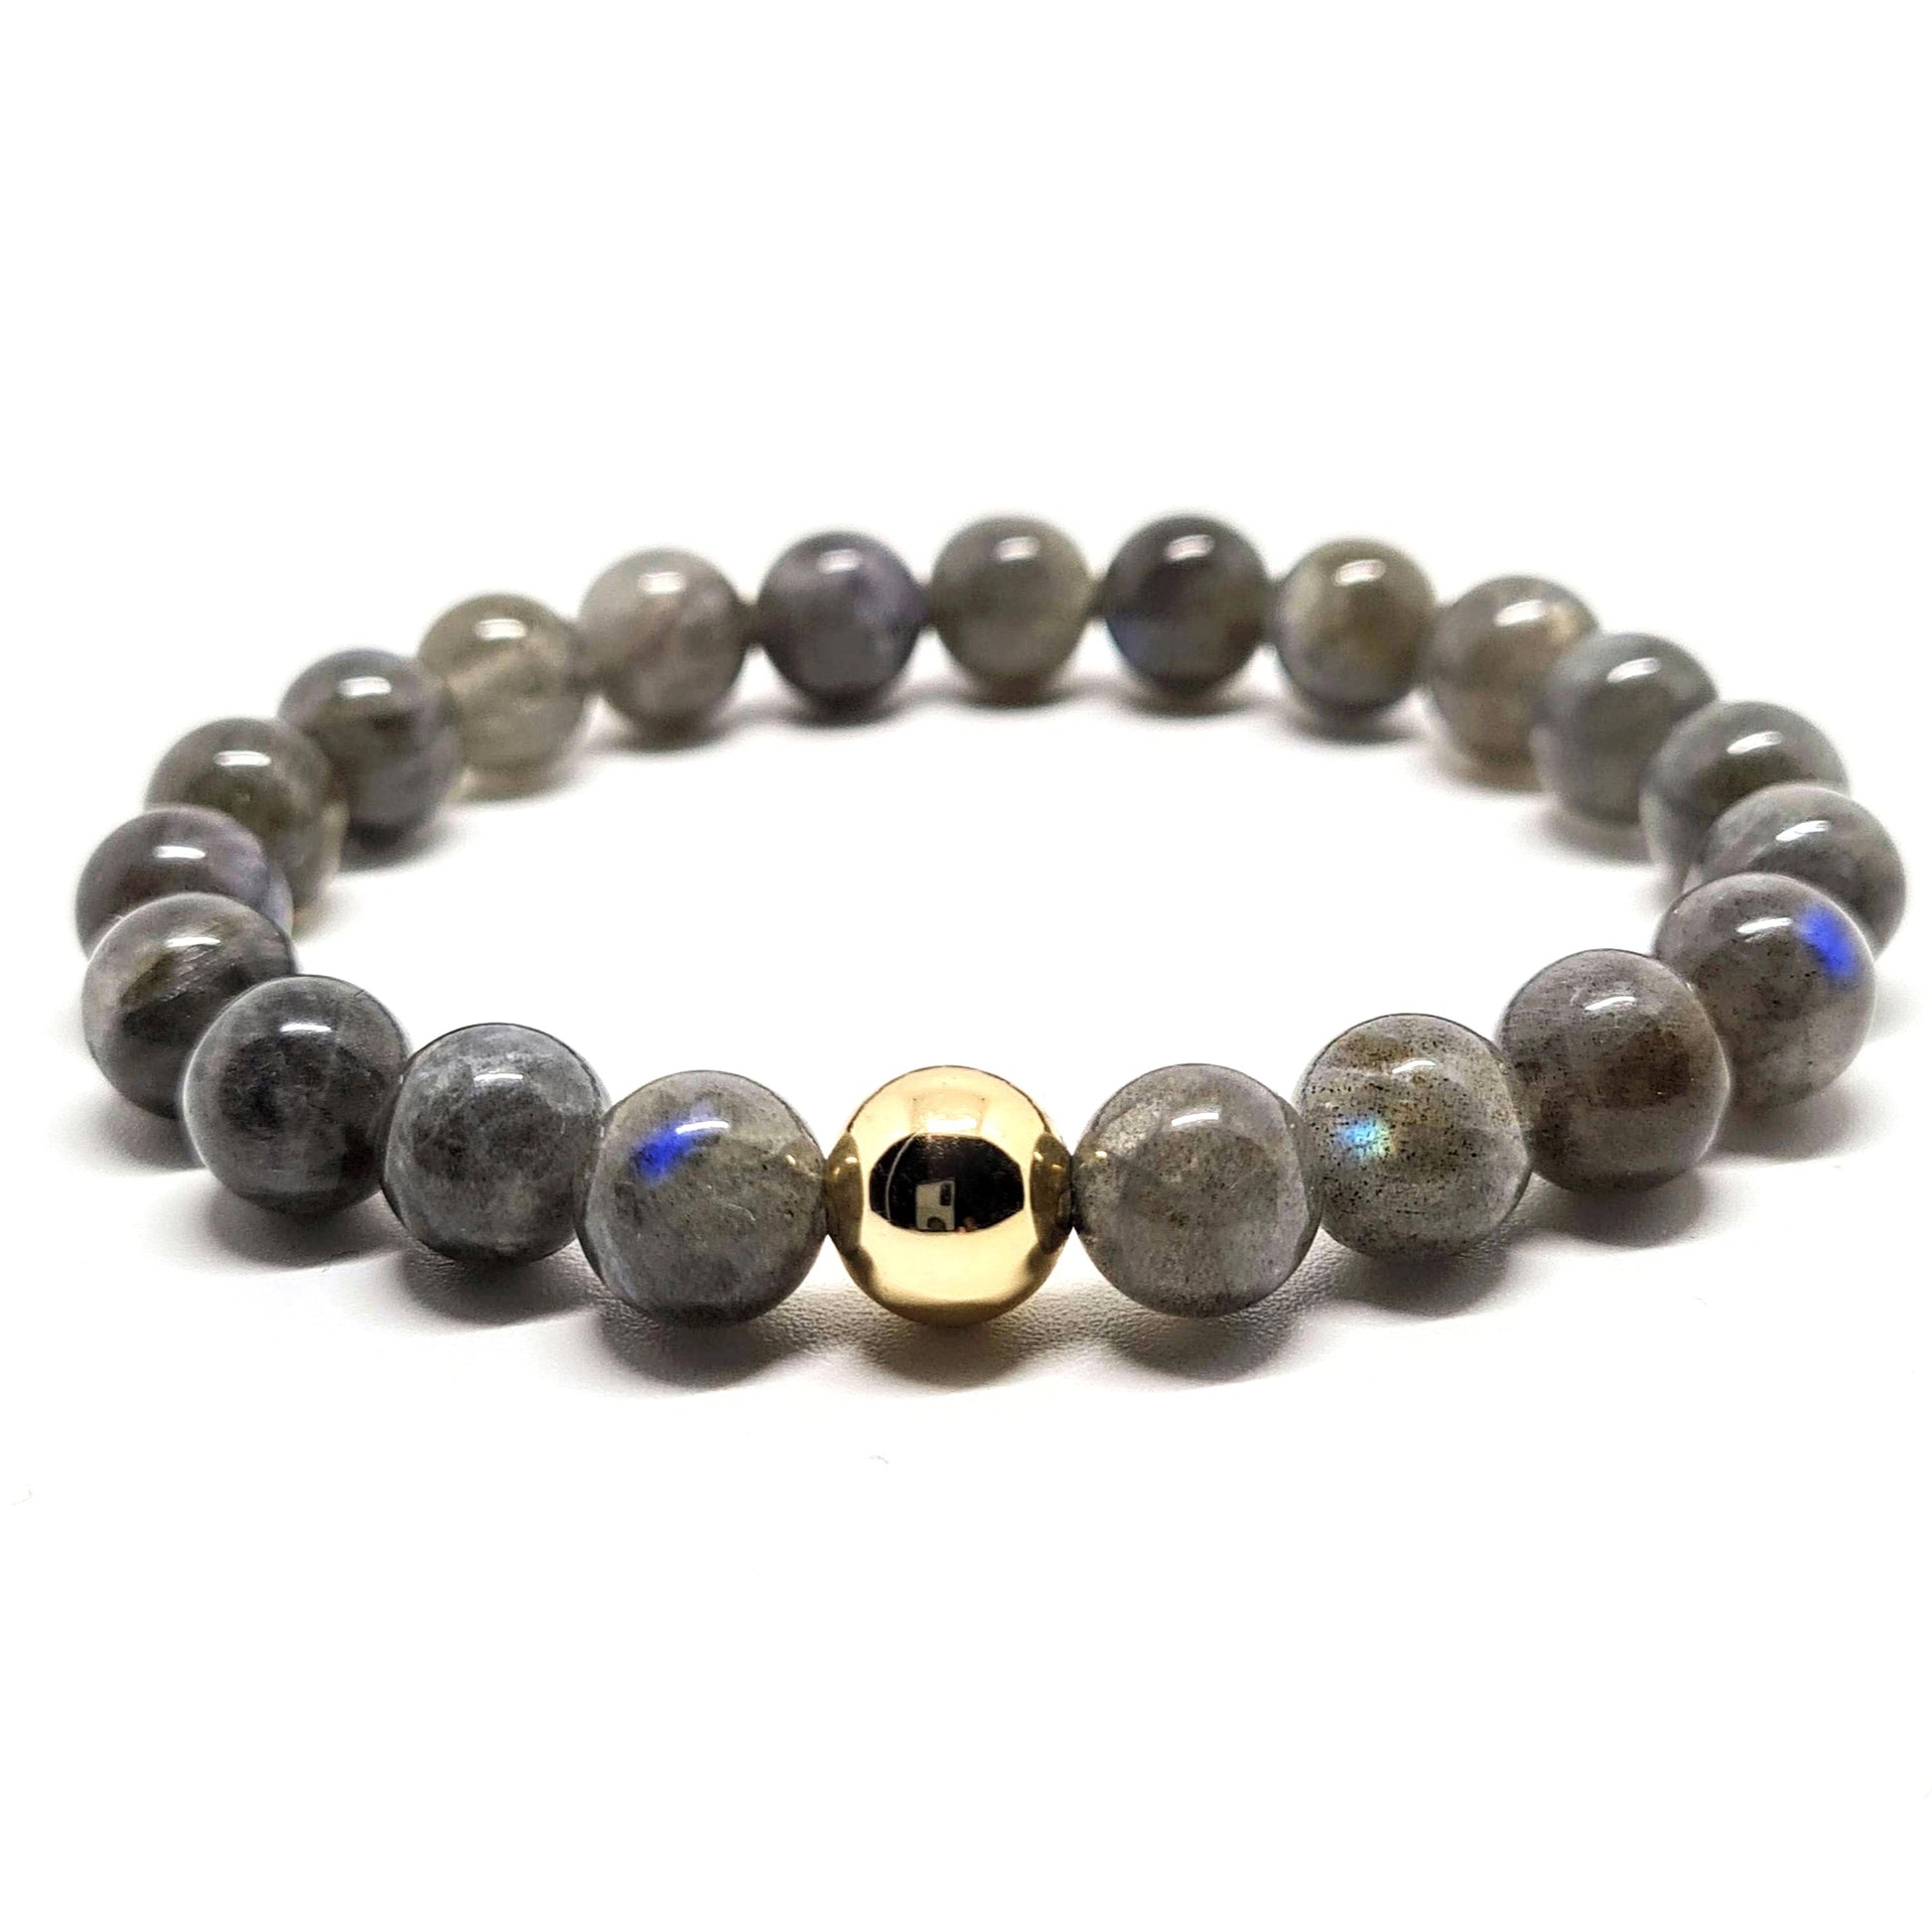 A Labradorite gemstone bracelet with 14ct gold filled accessory 